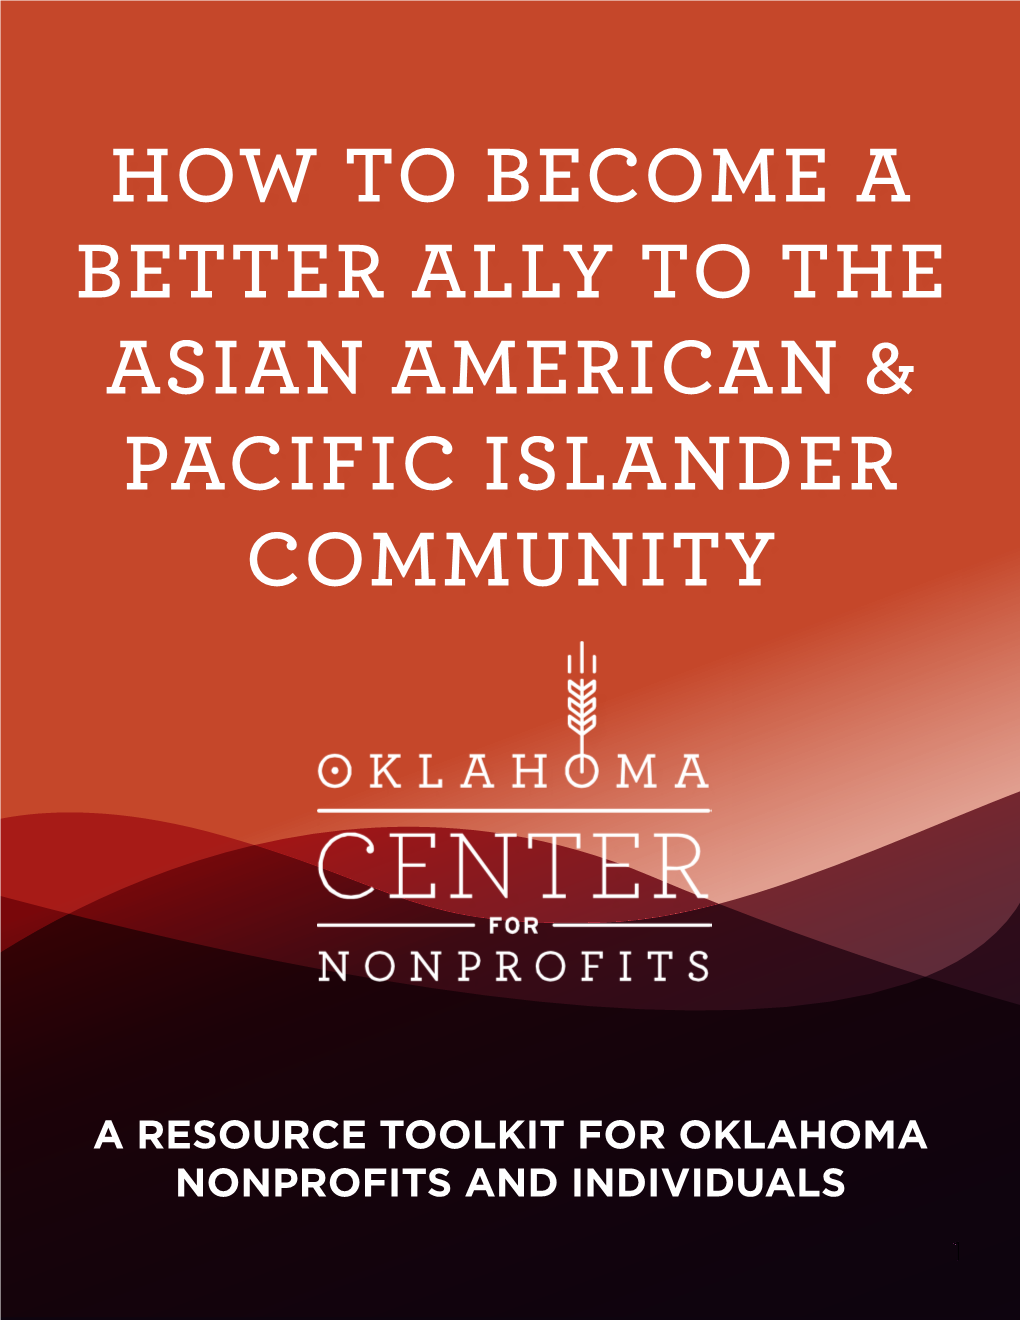 How to Become a Better Ally to the Asian American & Pacific Islander Community